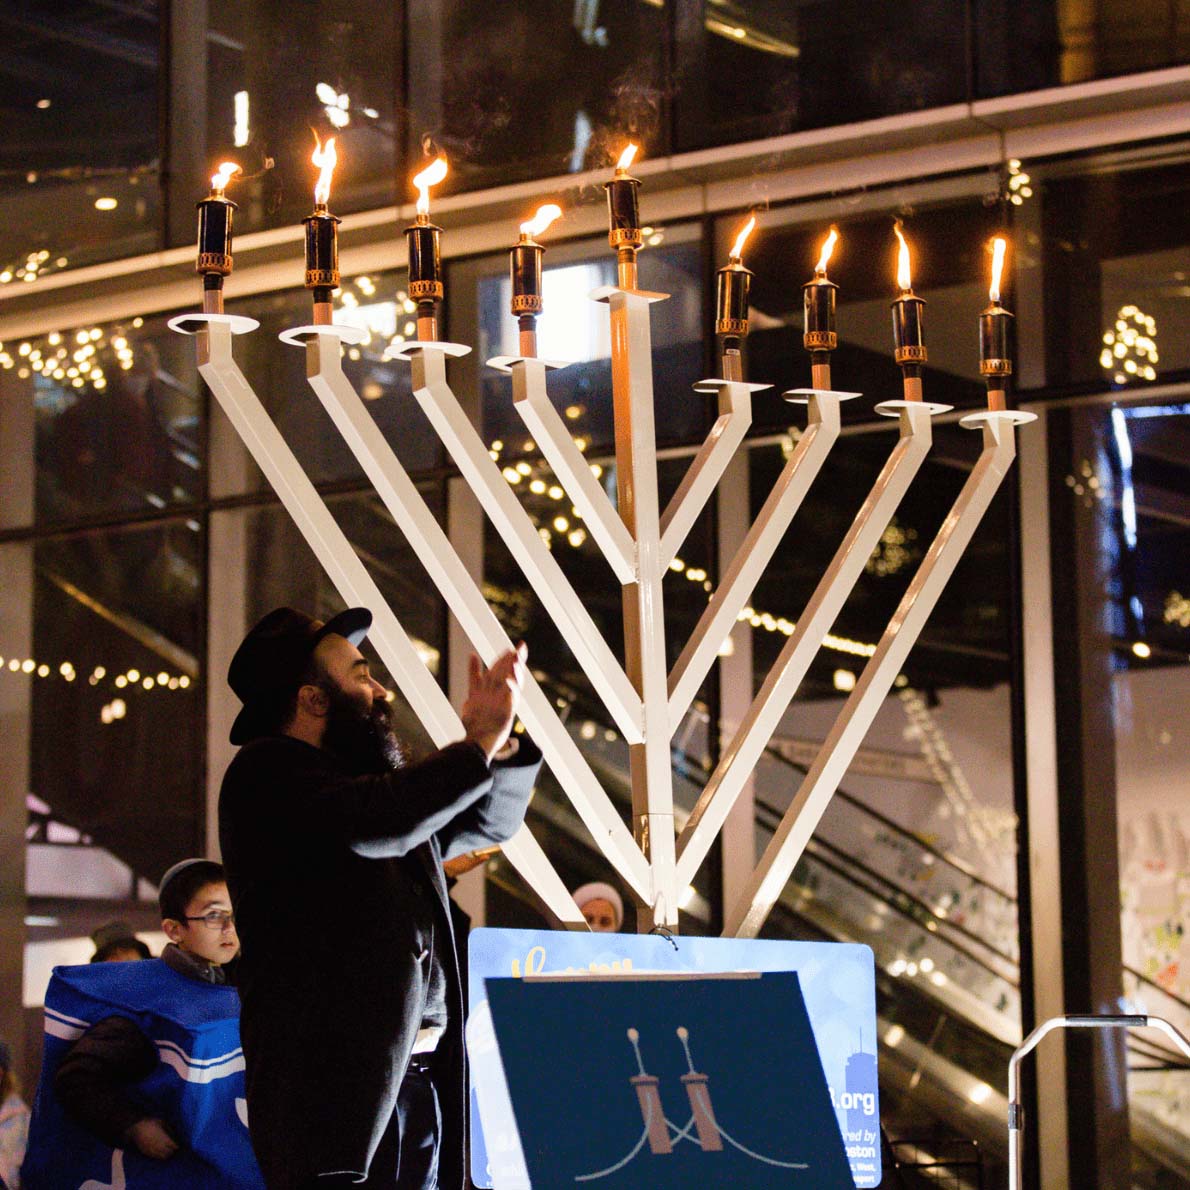 Two pictures. The one on the left features a bearded man with a brimmed hat on stands in front of a giant, fully lit Menorah. The one on the right features an indiviual capturing a lit Christmas tree with an iPhone. The individual is featured in the bottom left hand corner while the bottom portion of the Christmas tree is featured in the right hand corners.